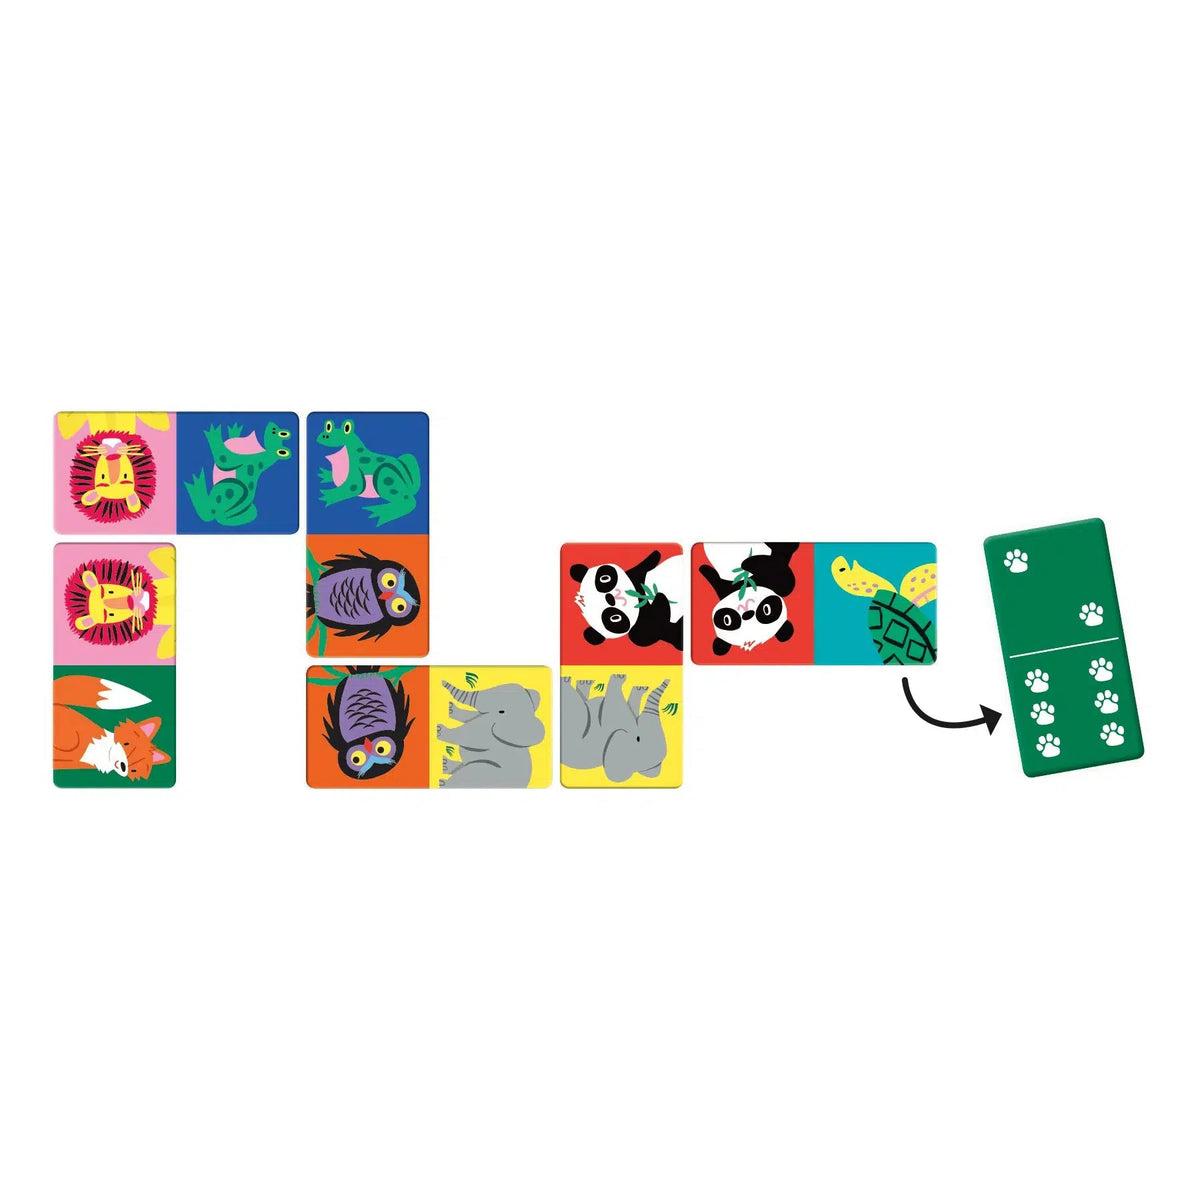 Wildlife Dominoes-Games-Mudpuppy | Chronicle | Hachette-Yellow Springs Toy Company